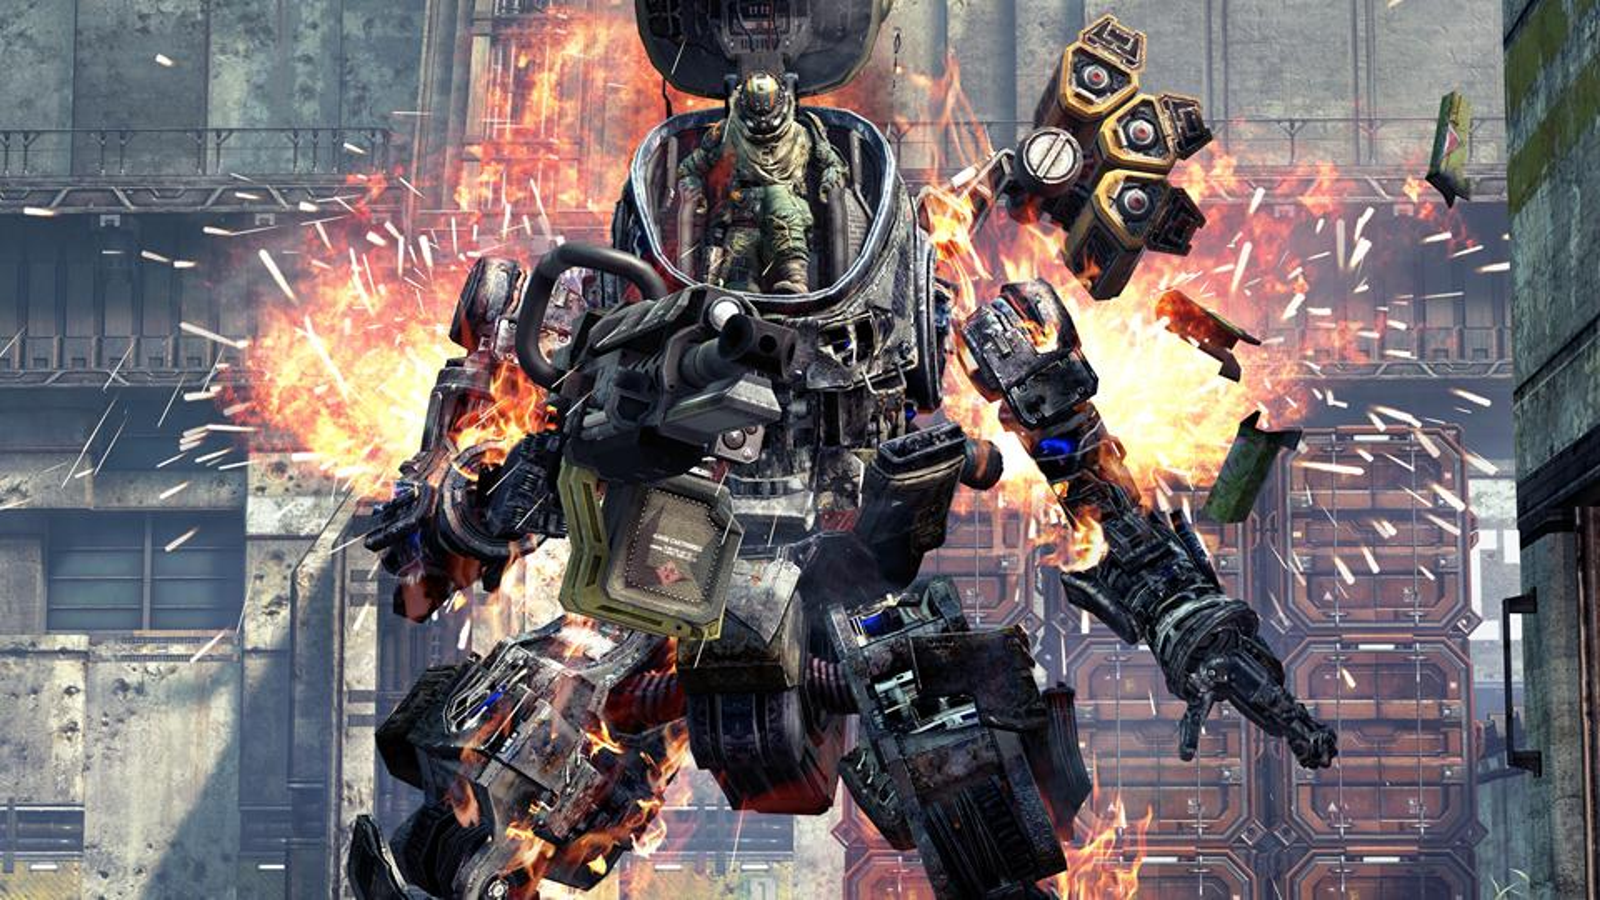 Titanfall 2 gameplay video gives you a look at upcoming Live Fire content  drop